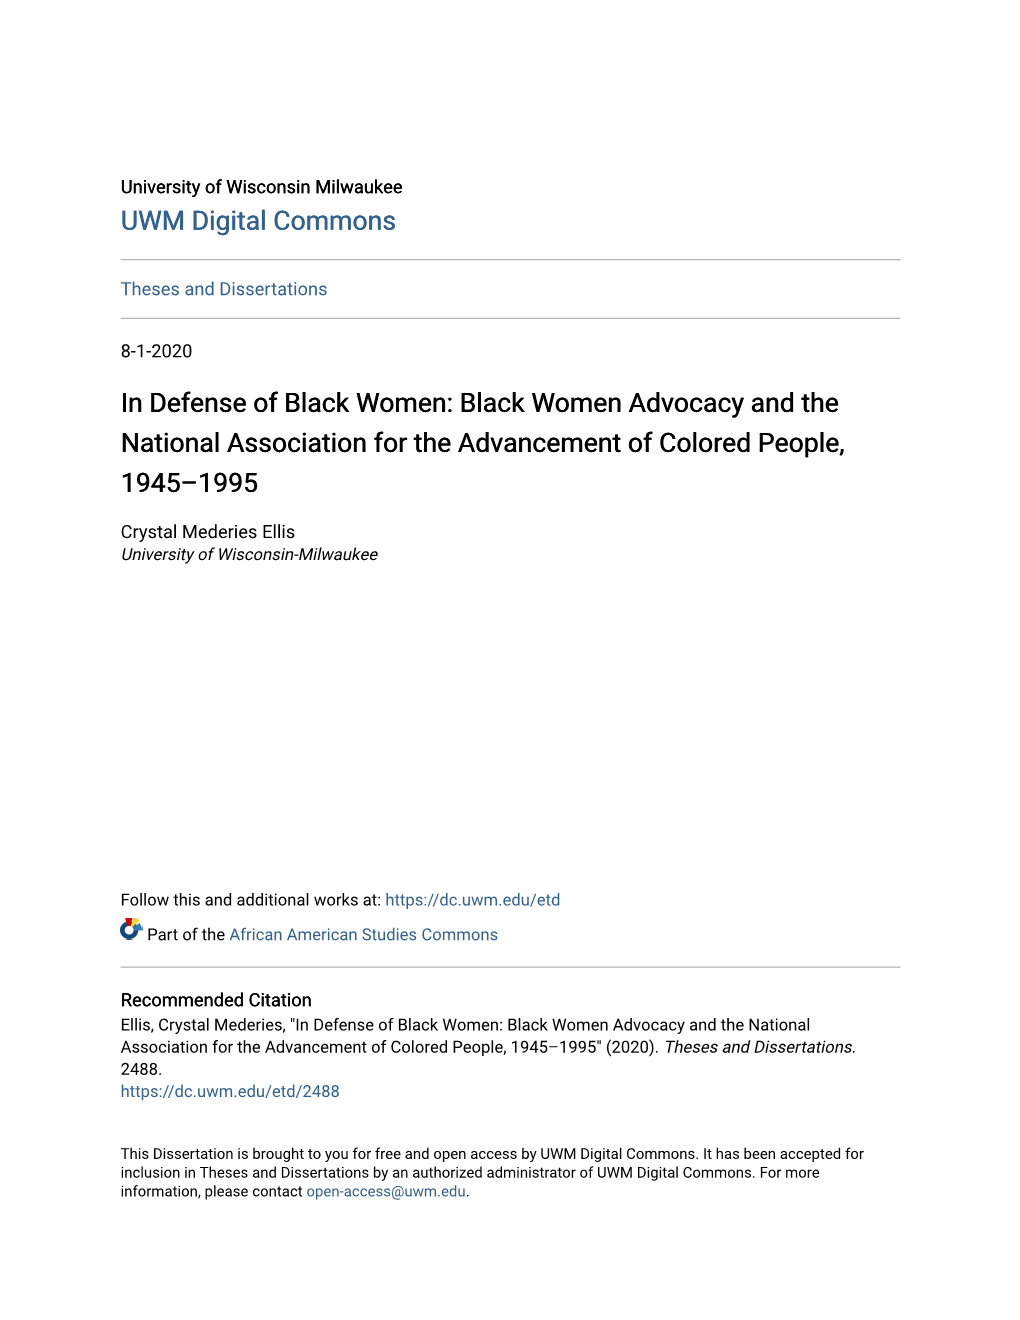 In Defense of Black Women: Black Women Advocacy and the National Association for the Advancement of Colored People, 1945–1995